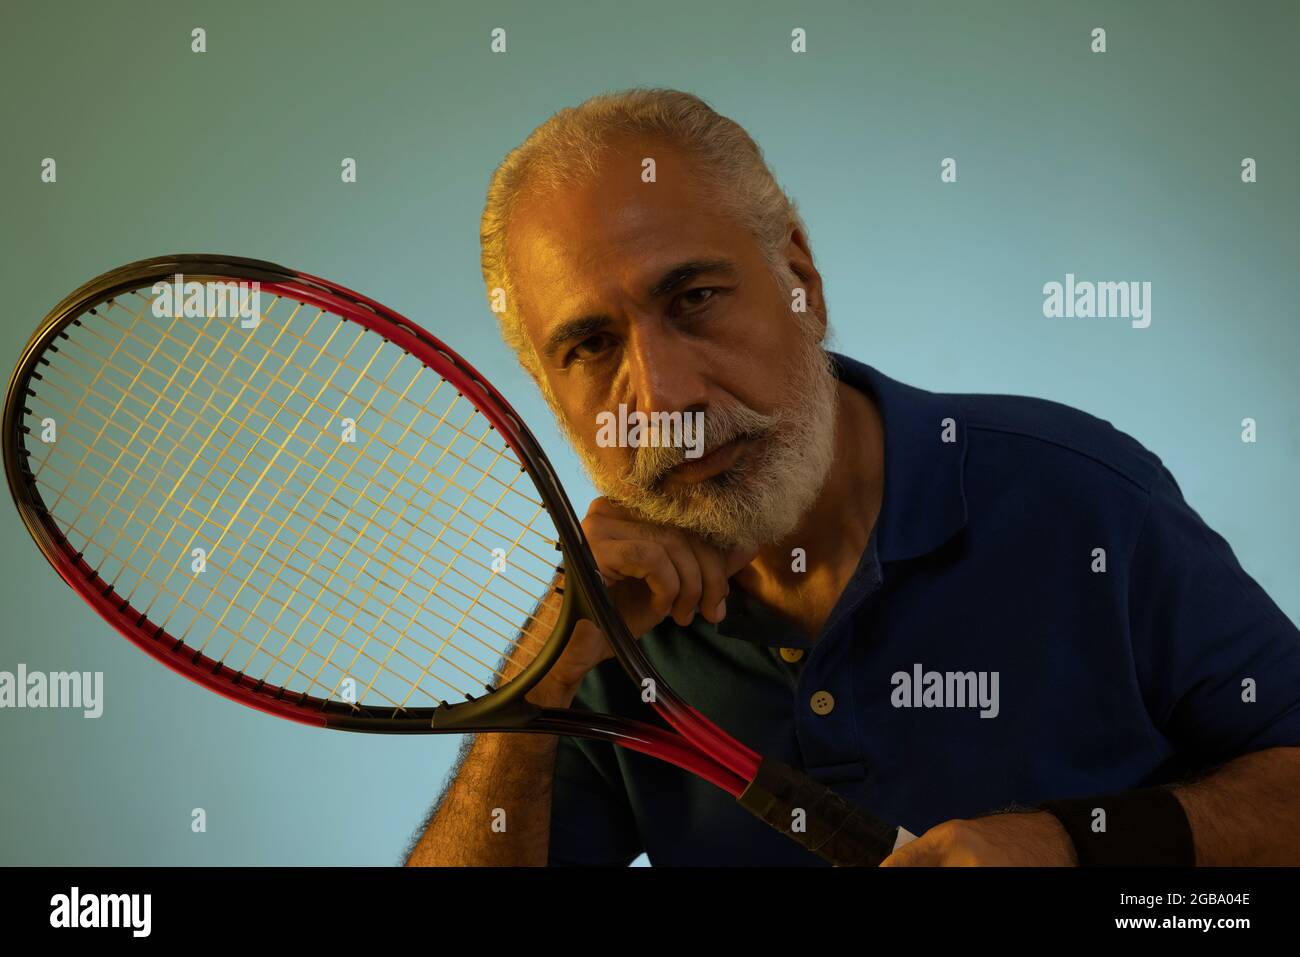 Page 12 - Urban Tennis High Resolution Stock Photography and Images - Alamy